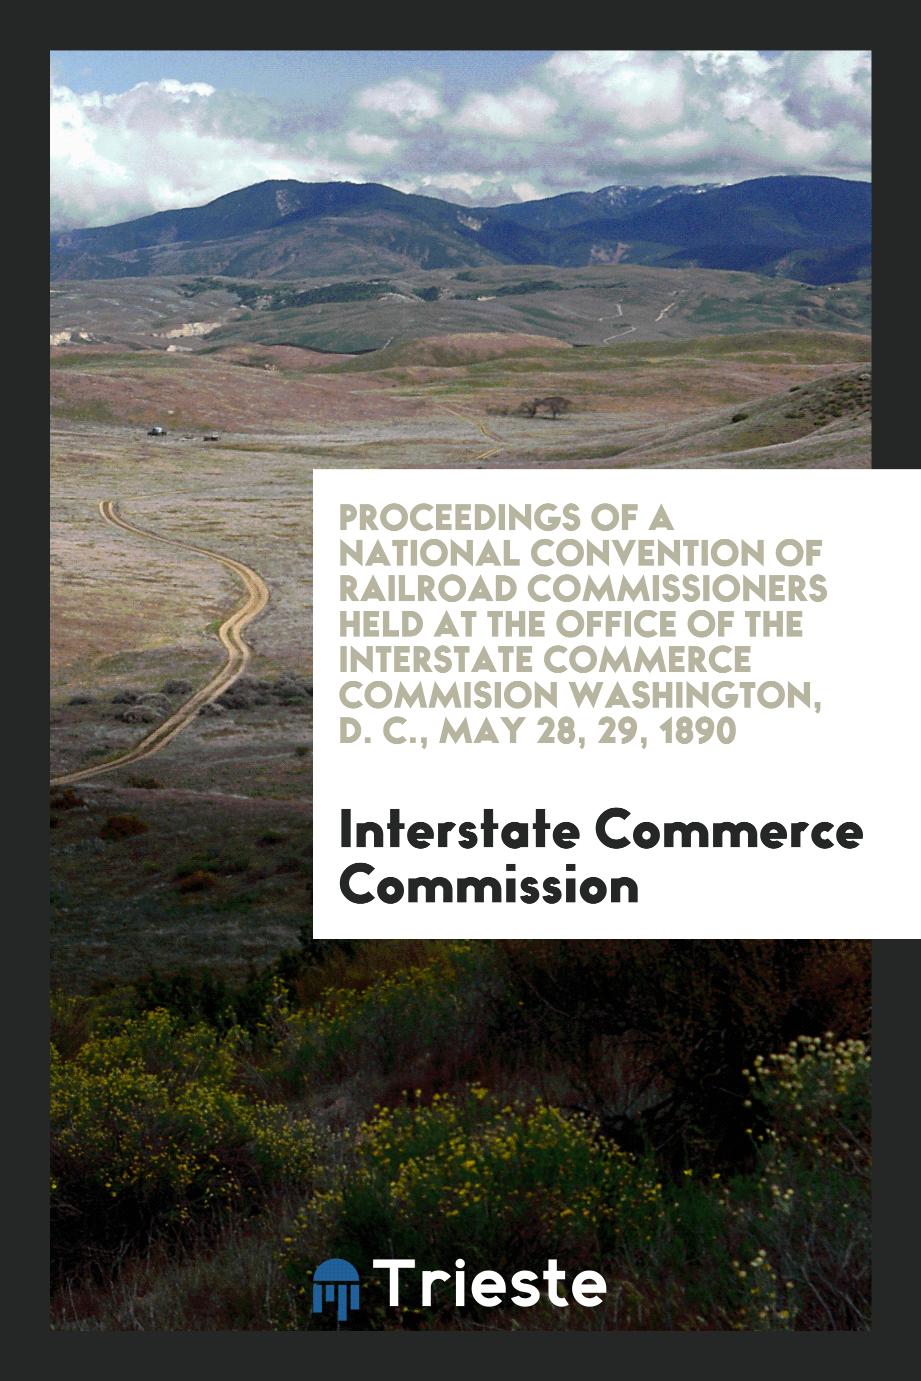 Proceedings of a National Convention of Railroad Commissioners Held at the Office of the Interstate Commerce Commision Washington, D. C., May 28, 29, 1890